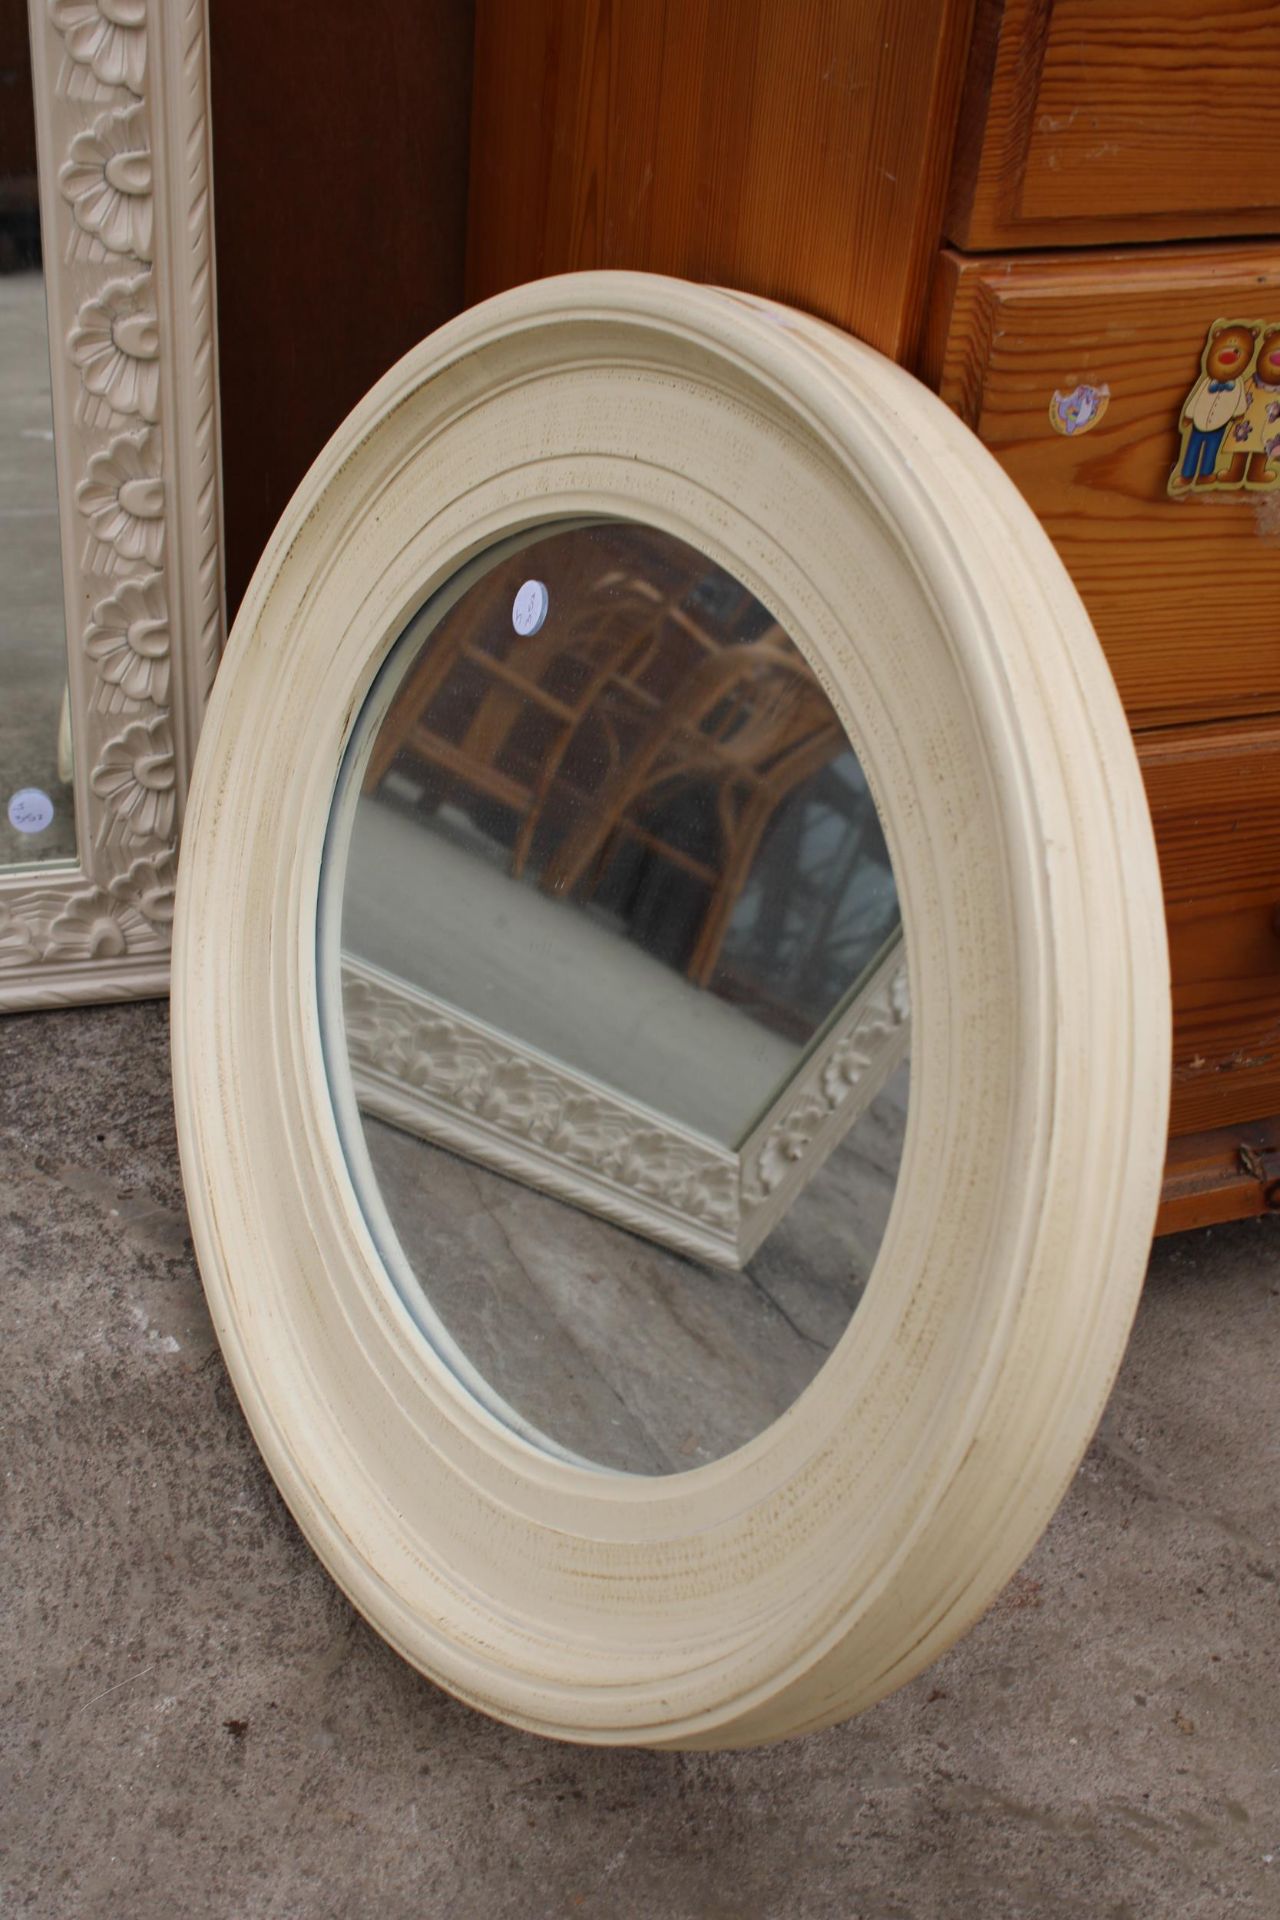 TWO WHITE WALL MIRRORS - ONE CIRCULAR 9172 DIAMETER AND ONE RECTANGULAR - 27" X 25" - Image 3 of 3